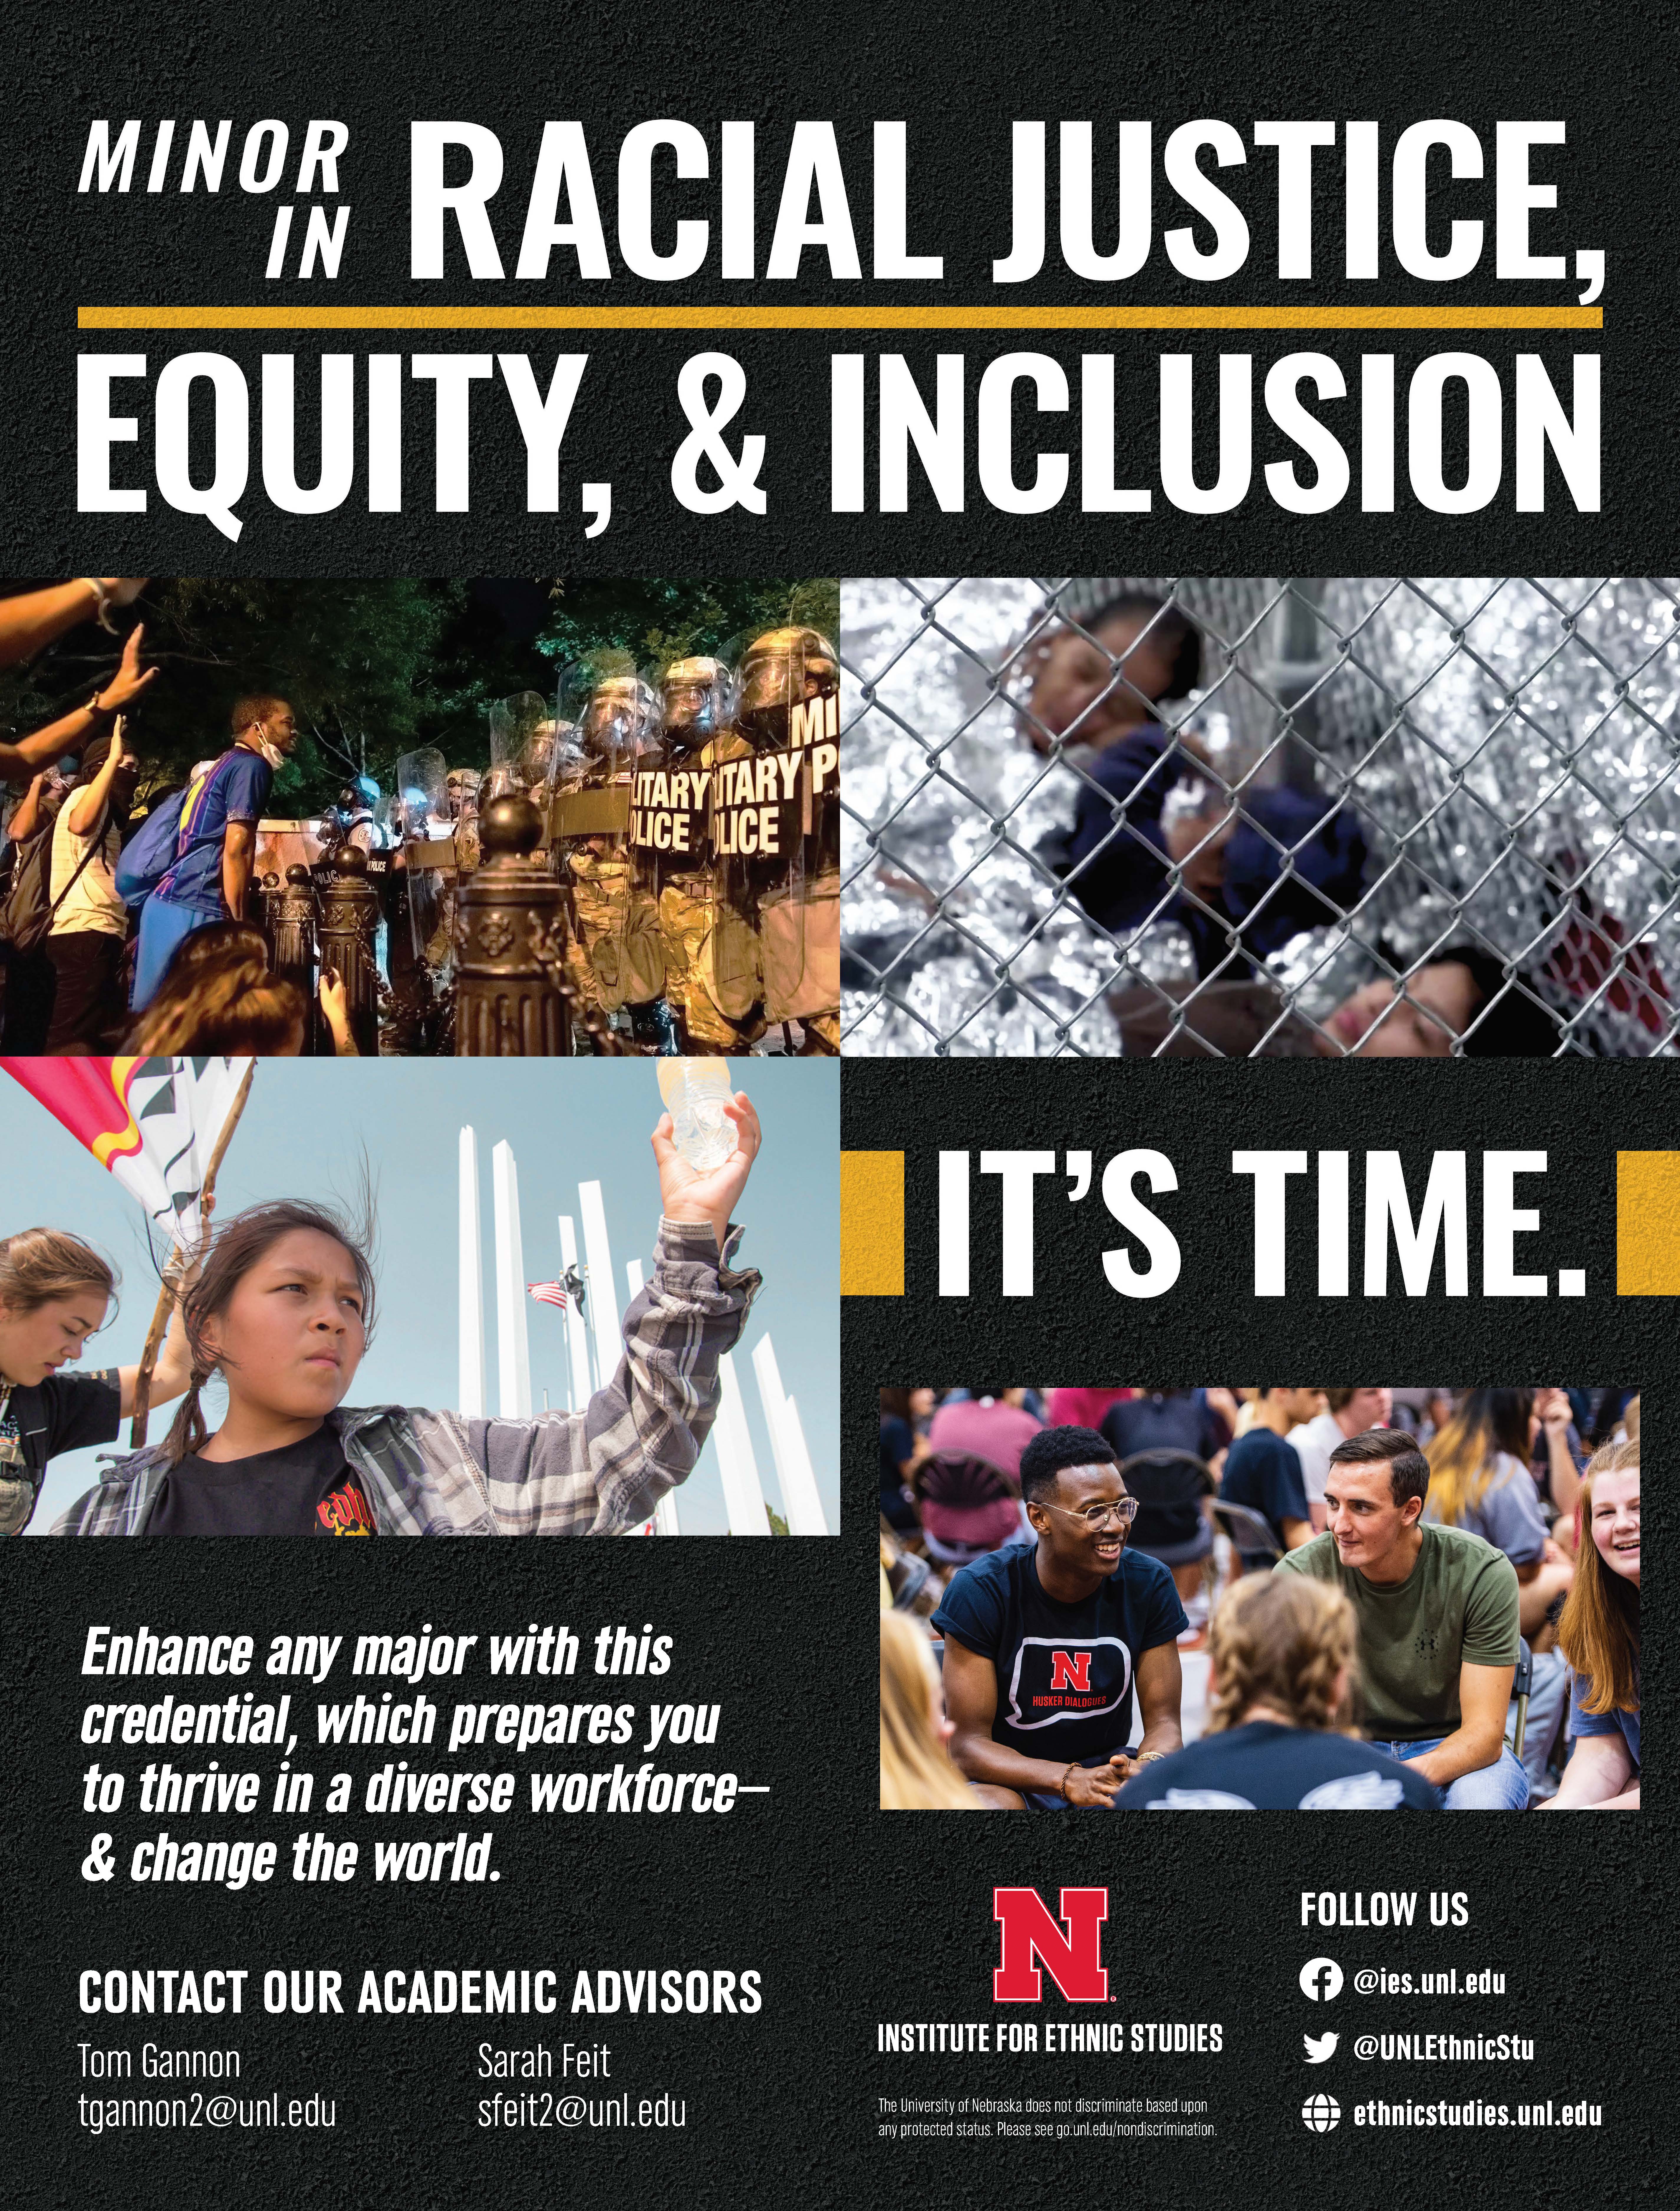 New Minor in Racial Justice, Equity, & Inclusion